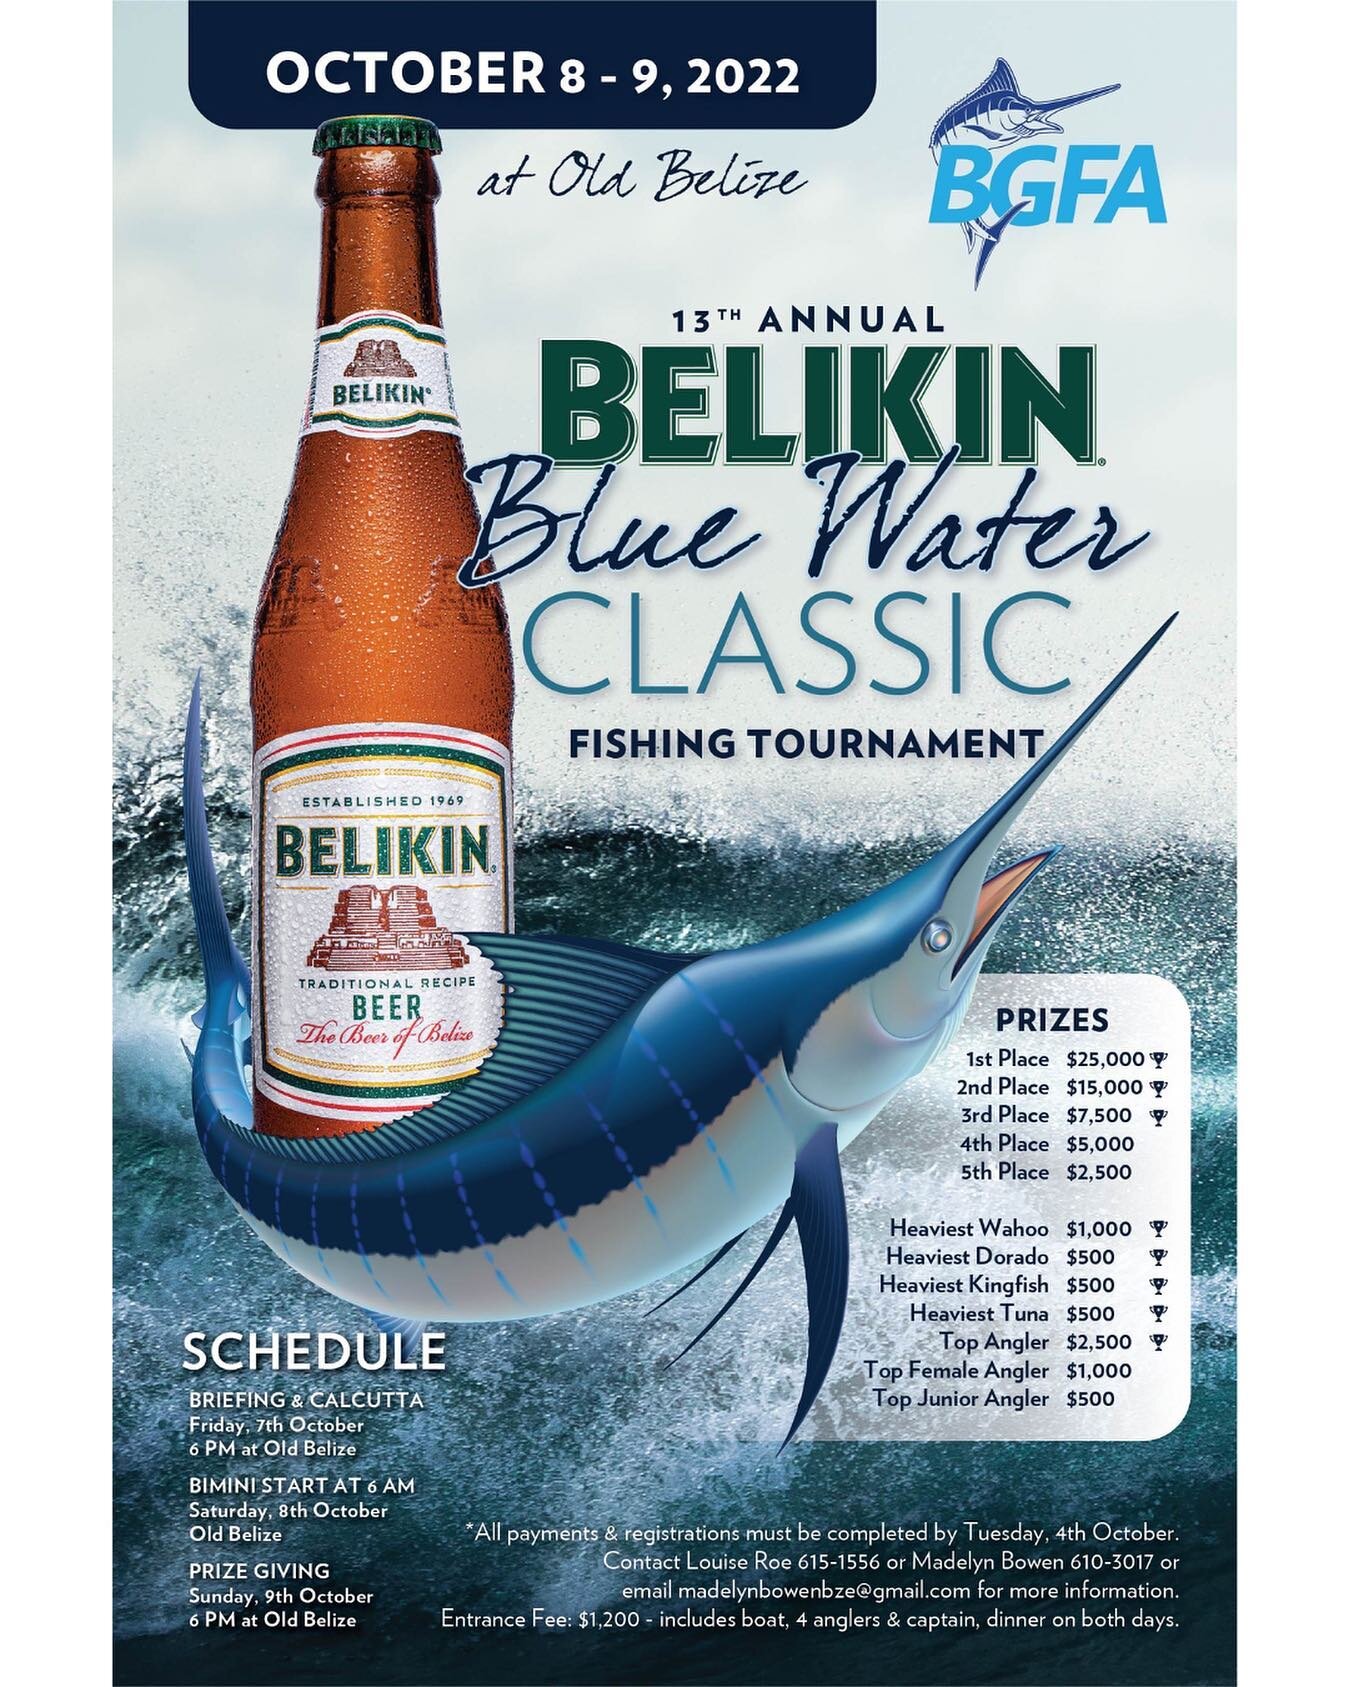 Anglers, get excited! Here are all the details you need for our flagship tournament, the 13th Annual Belikin Blue Water Classic! 🇧🇿 #BelizeBWC22 

It all starts at tournment base&mdash;Old Belize in Belize City&mdash;at 6 PM on Friday, October 7, w